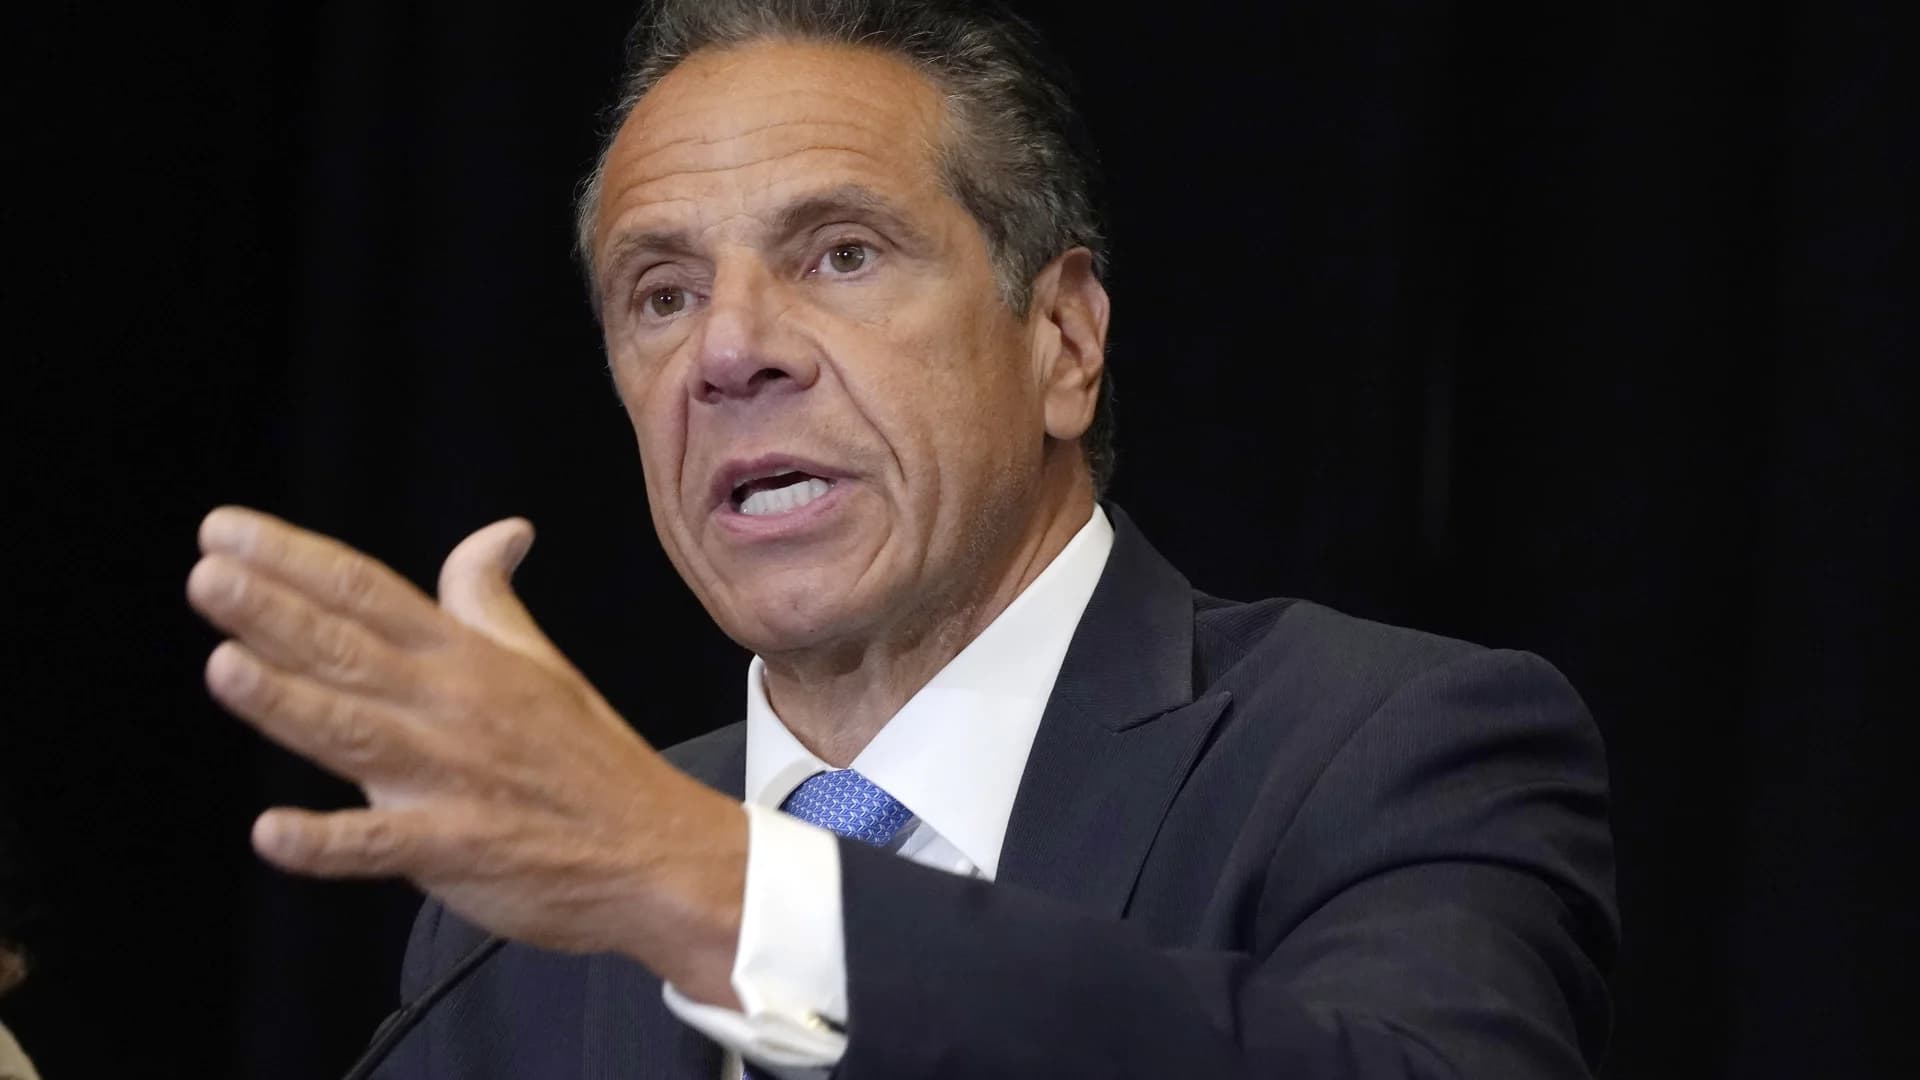 Cuomo: Taxpayers should pay sexual harassment legal bills